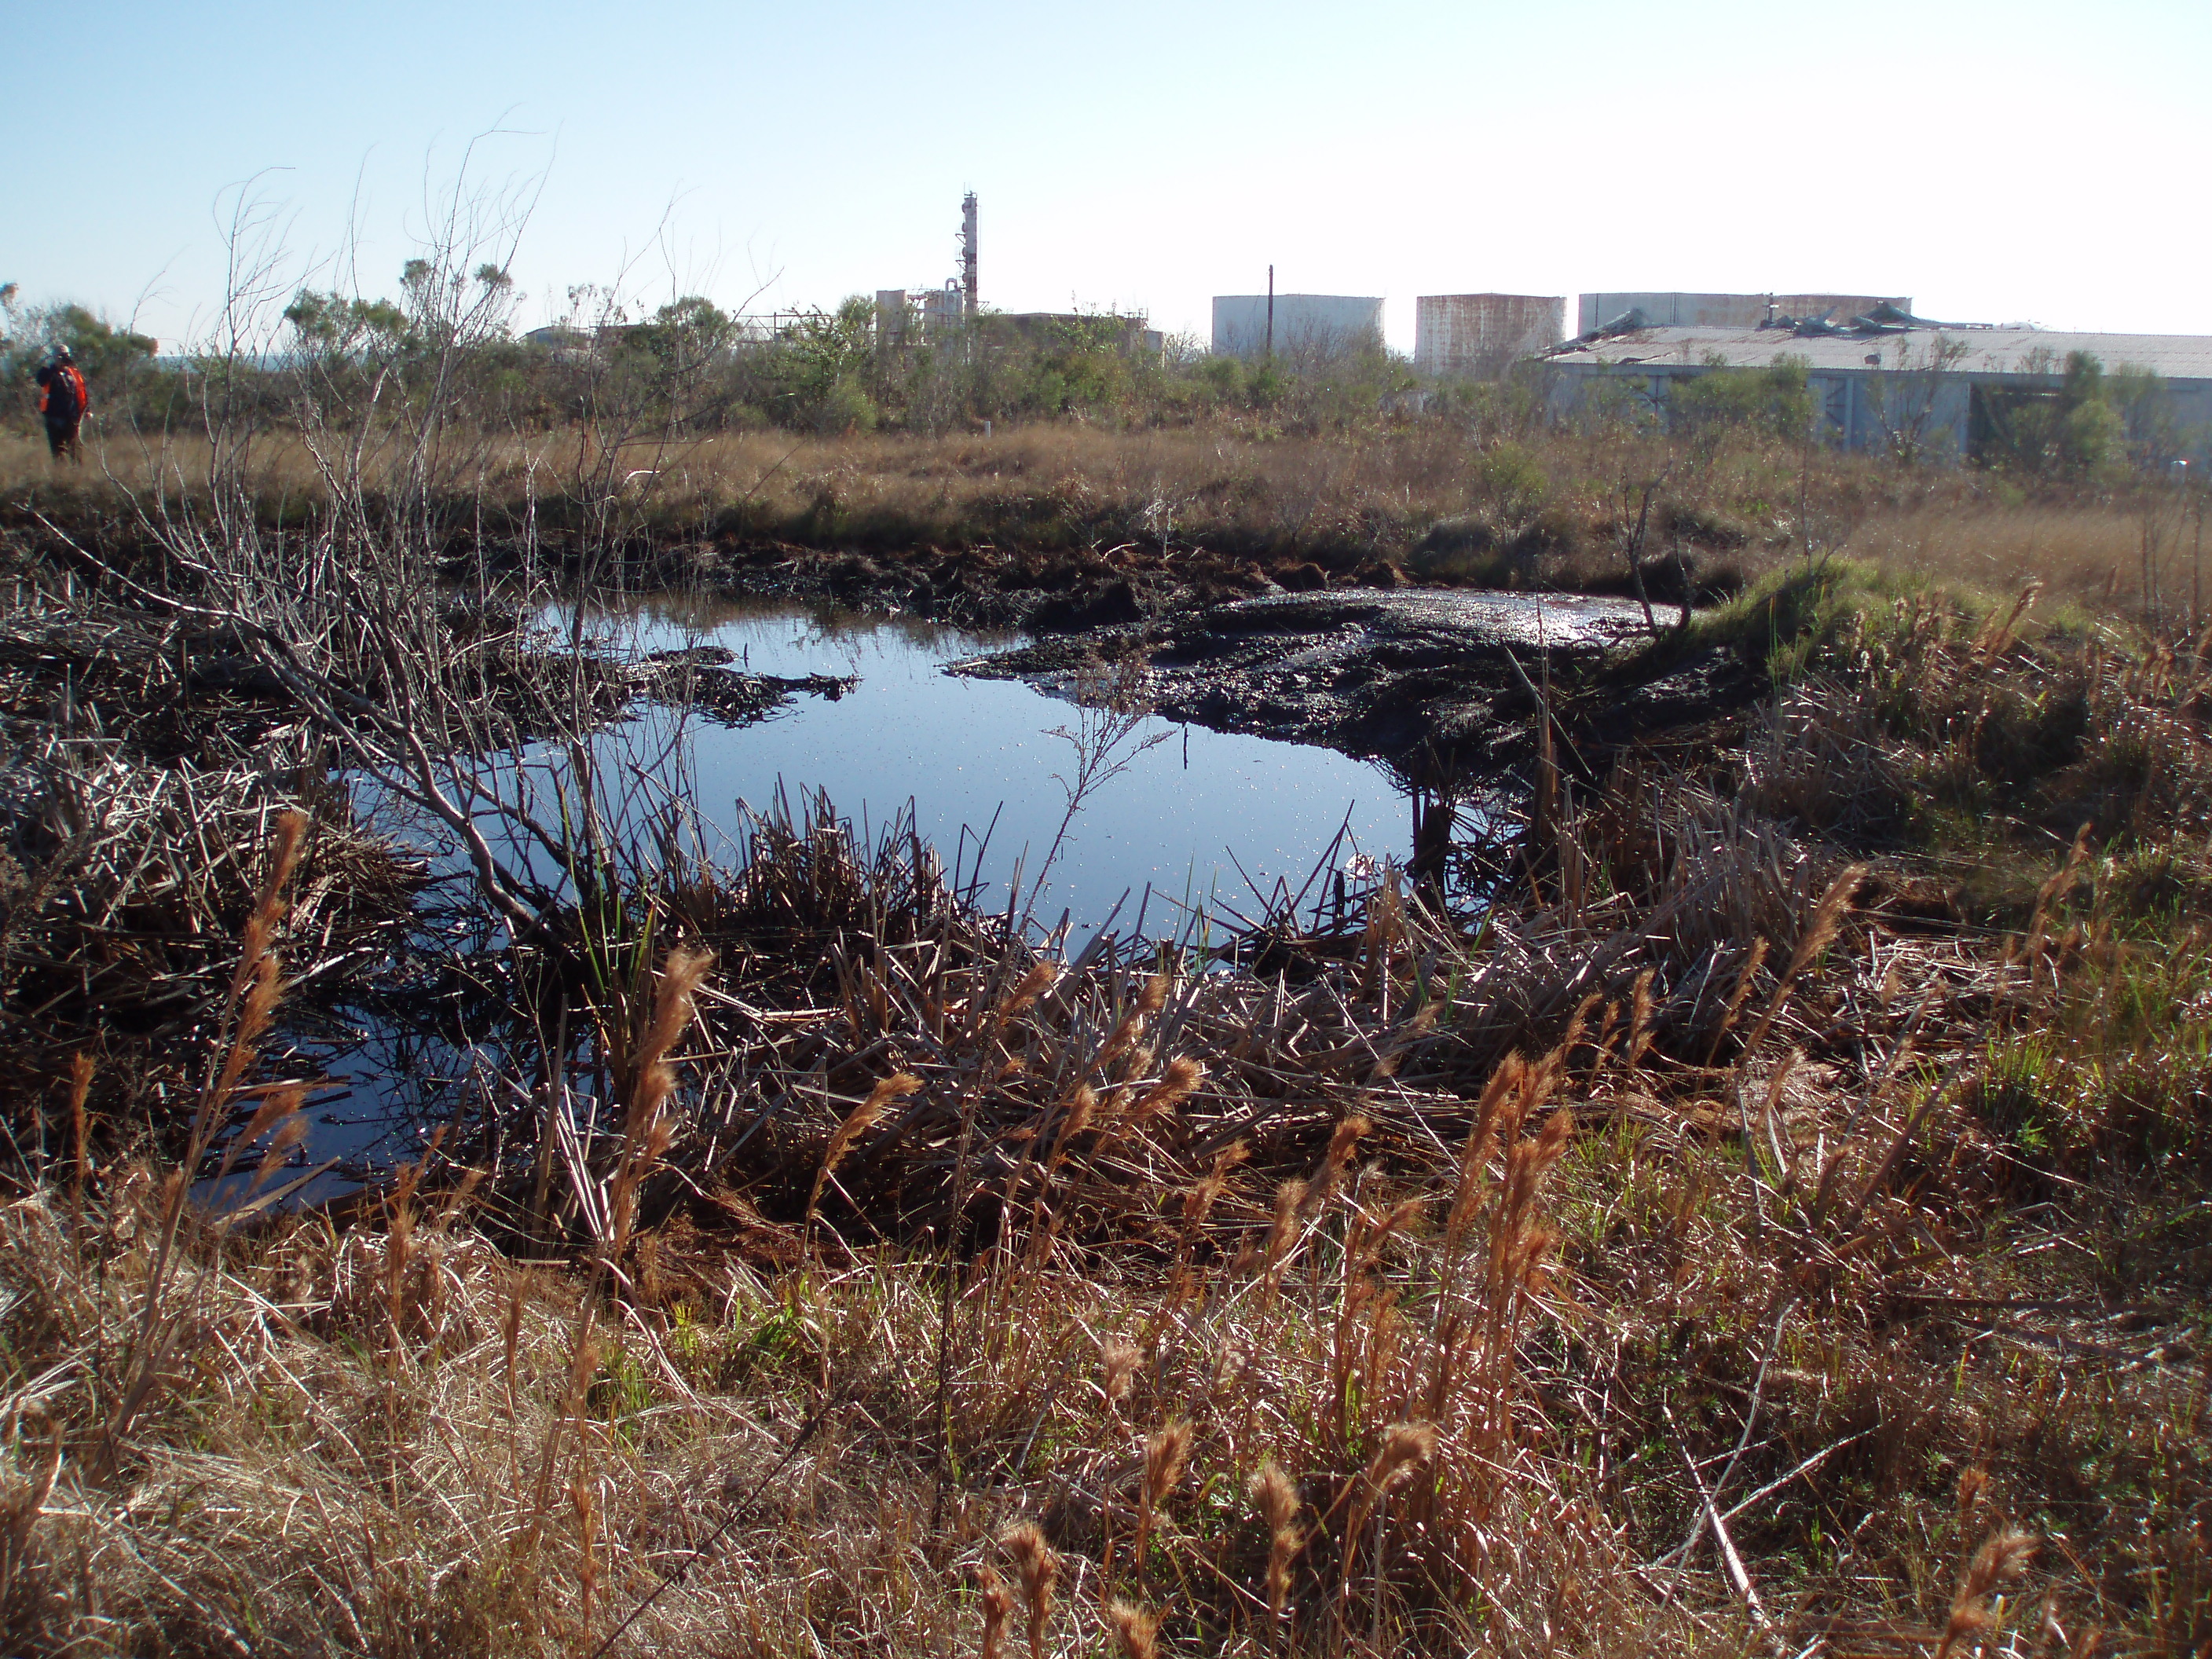 Malone superfund waste site in Texas. Oil pit over grass habitat prior to cleanup